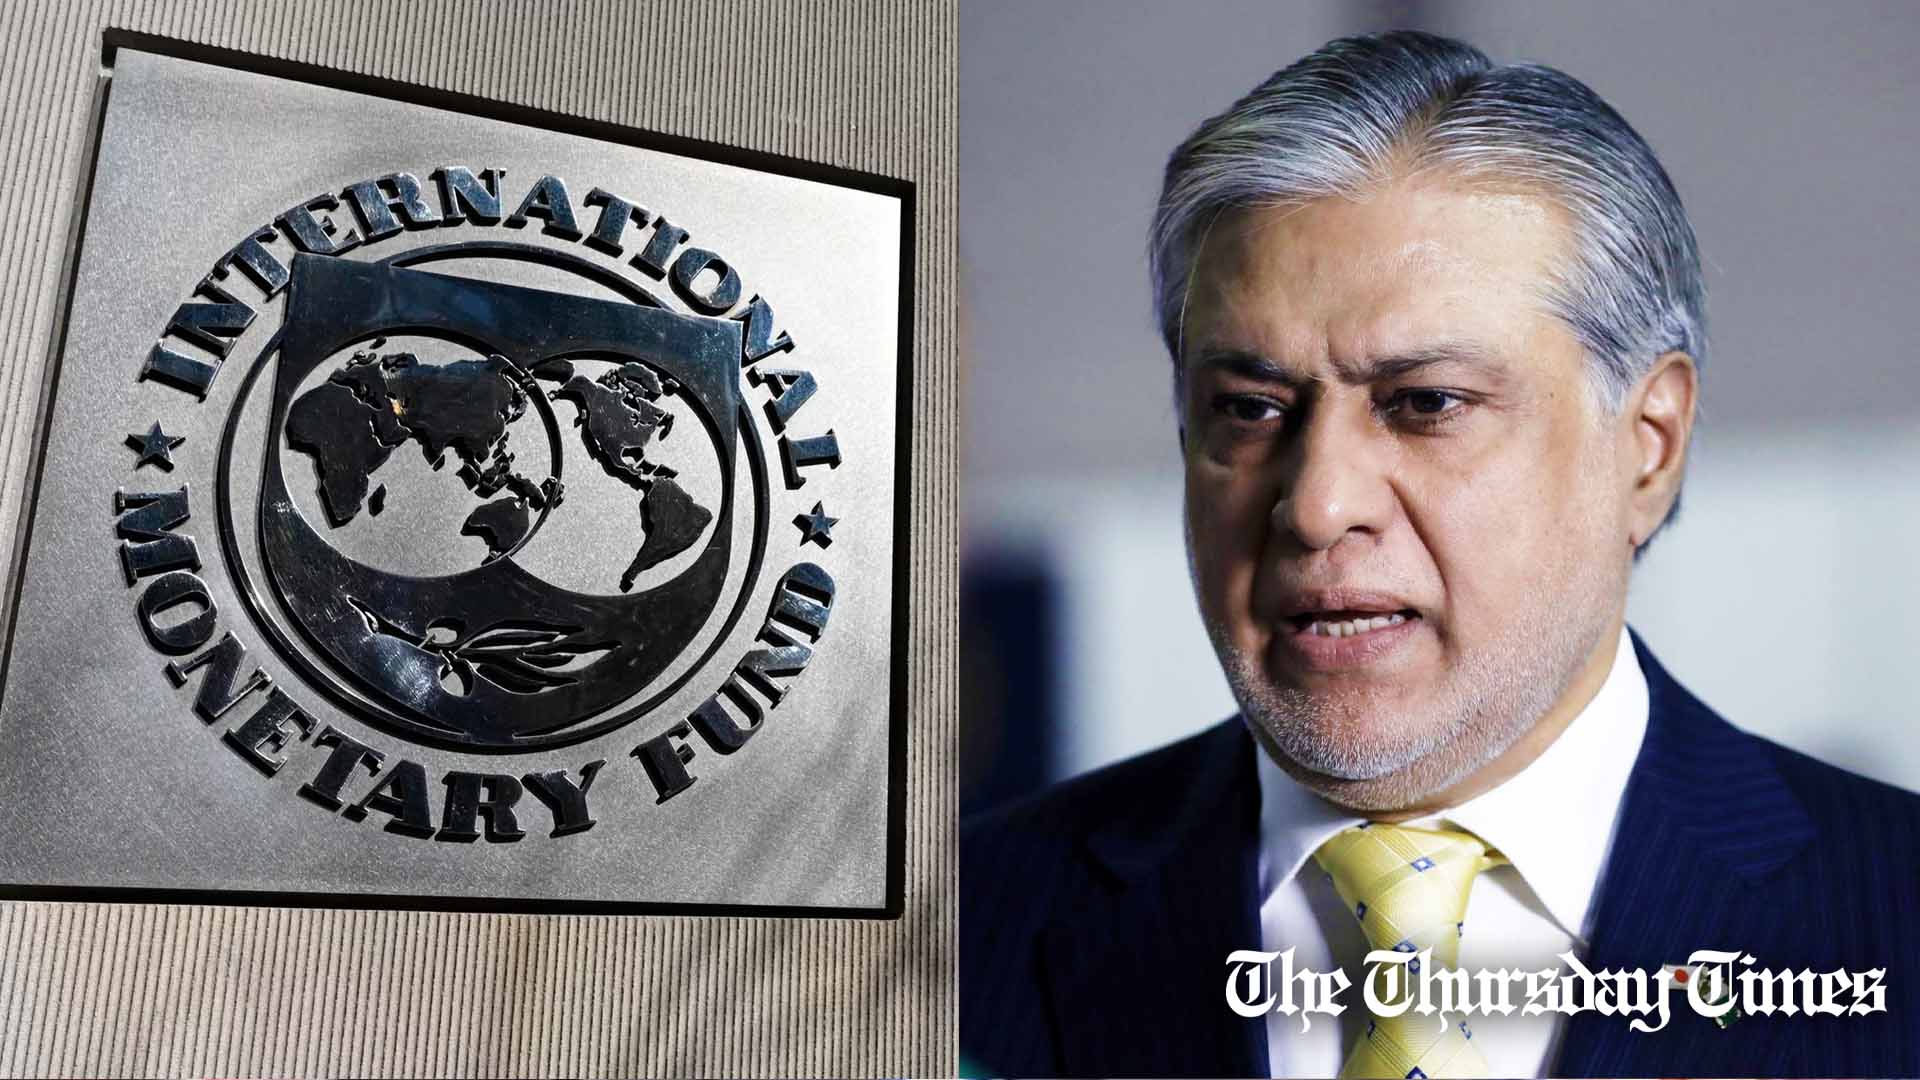 A combined file photo is shown of the IMF emblem at Washington, D.C. alongside finance minister Ishaq Dar. — FILE/THE THURSDAY TIMES